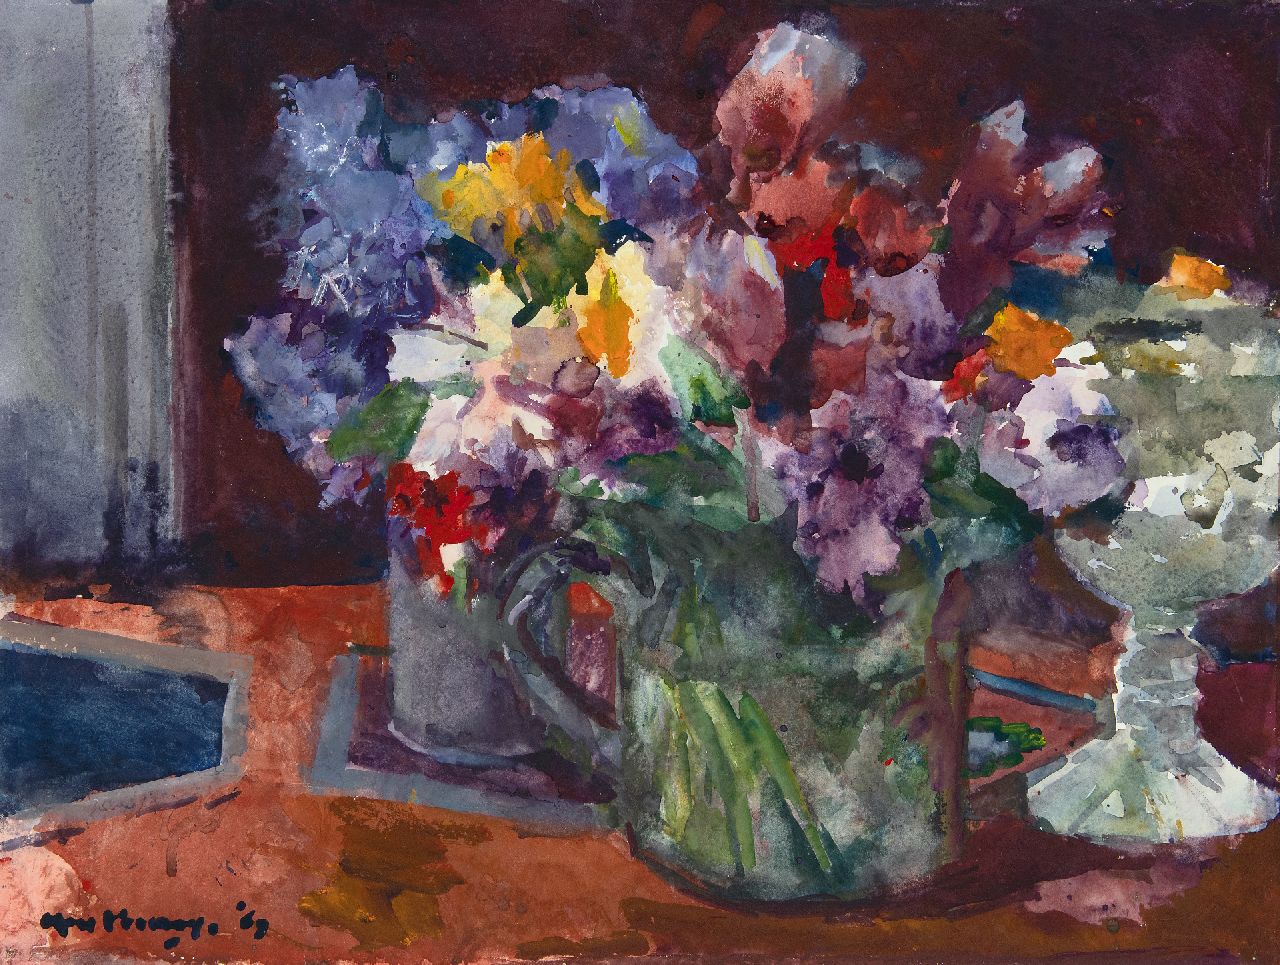 Verwey K.  | Kees Verwey | Watercolours and drawings offered for sale | Vases with flowers, watercolour on paper 48.8 x 63.9 cm, signed l.l. and dated '69